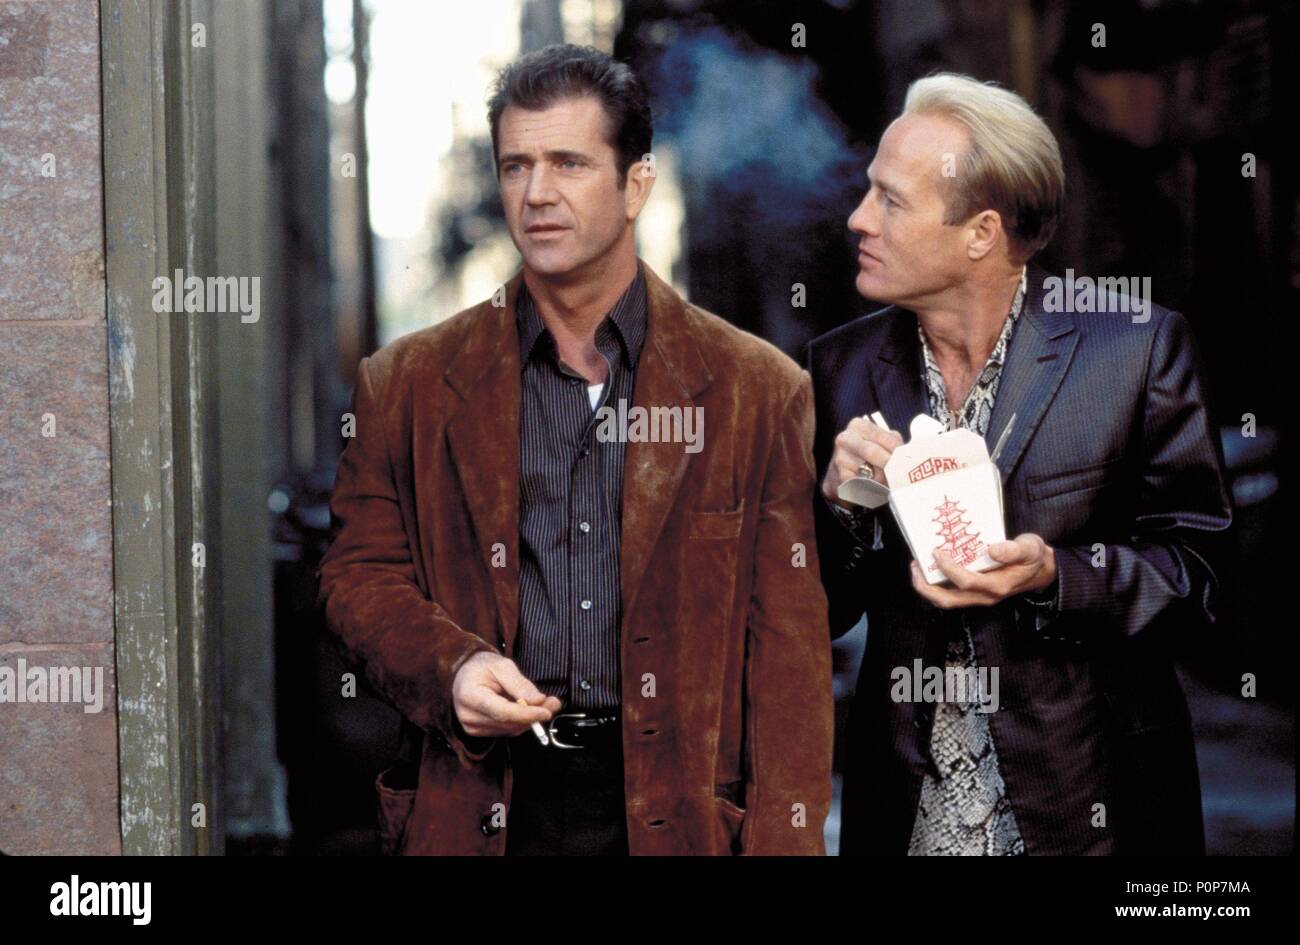 Original Film Title: PAYBACK.  English Title: PAYBACK.  Film Director: BRIAN HELGELAND.  Year: 1999.  Stars: MEL GIBSON; GREGG HENRY. Credit: WARNER BROS. PICTURES / COOPER, ANDREW / Album Stock Photo